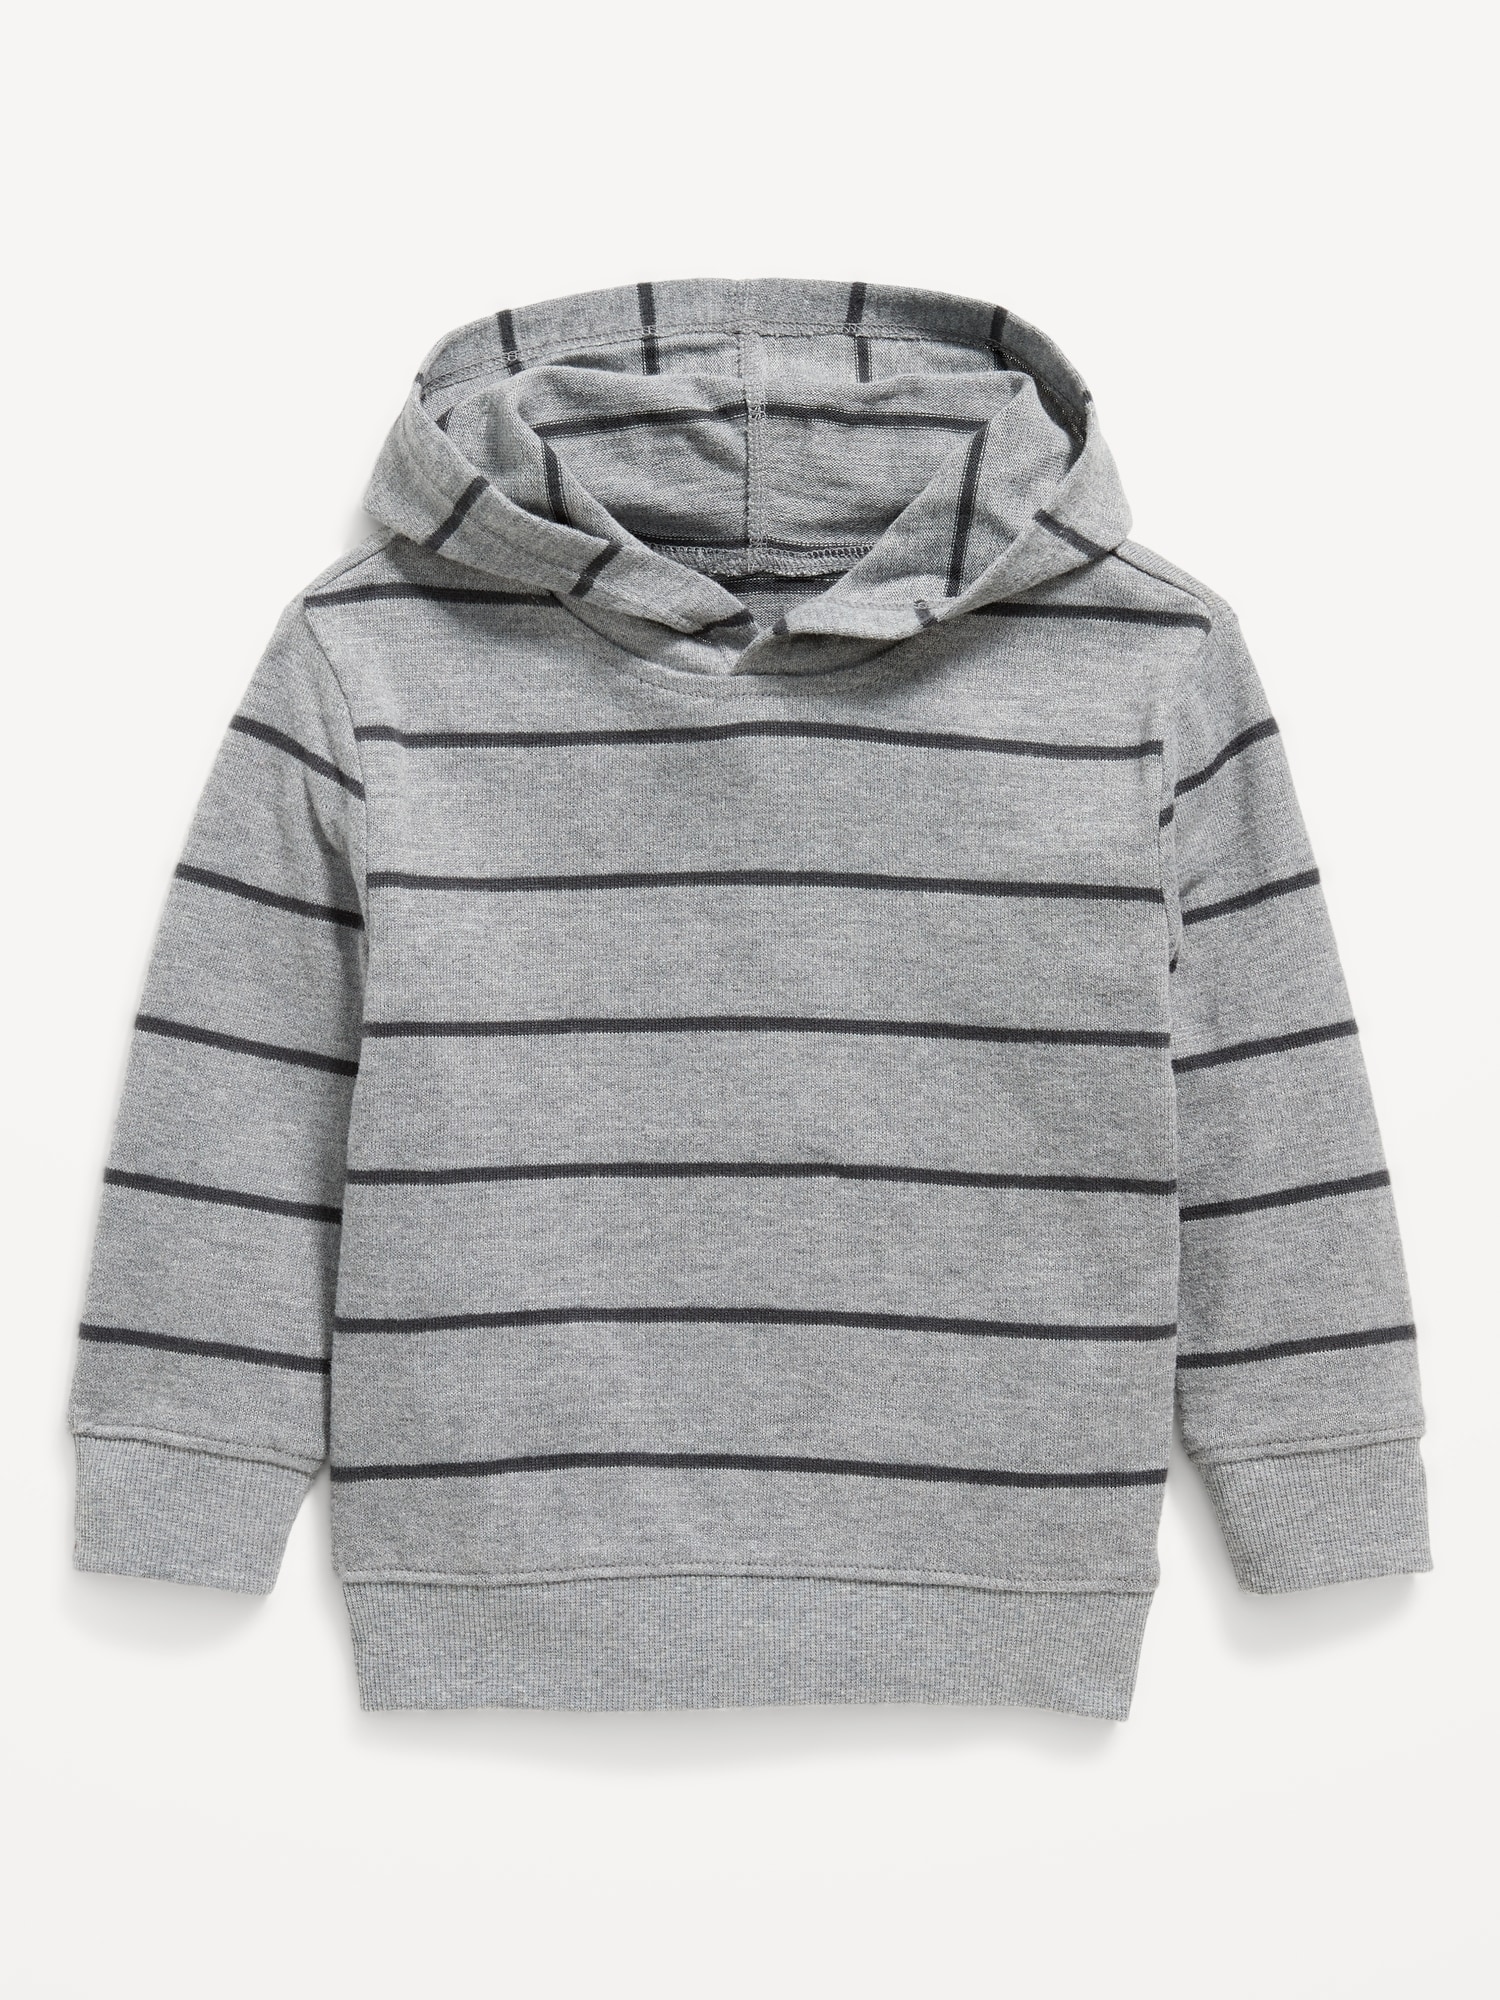 Navy Toddler for | Old Hoodie Pullover Boys Striped Cozy-Knit